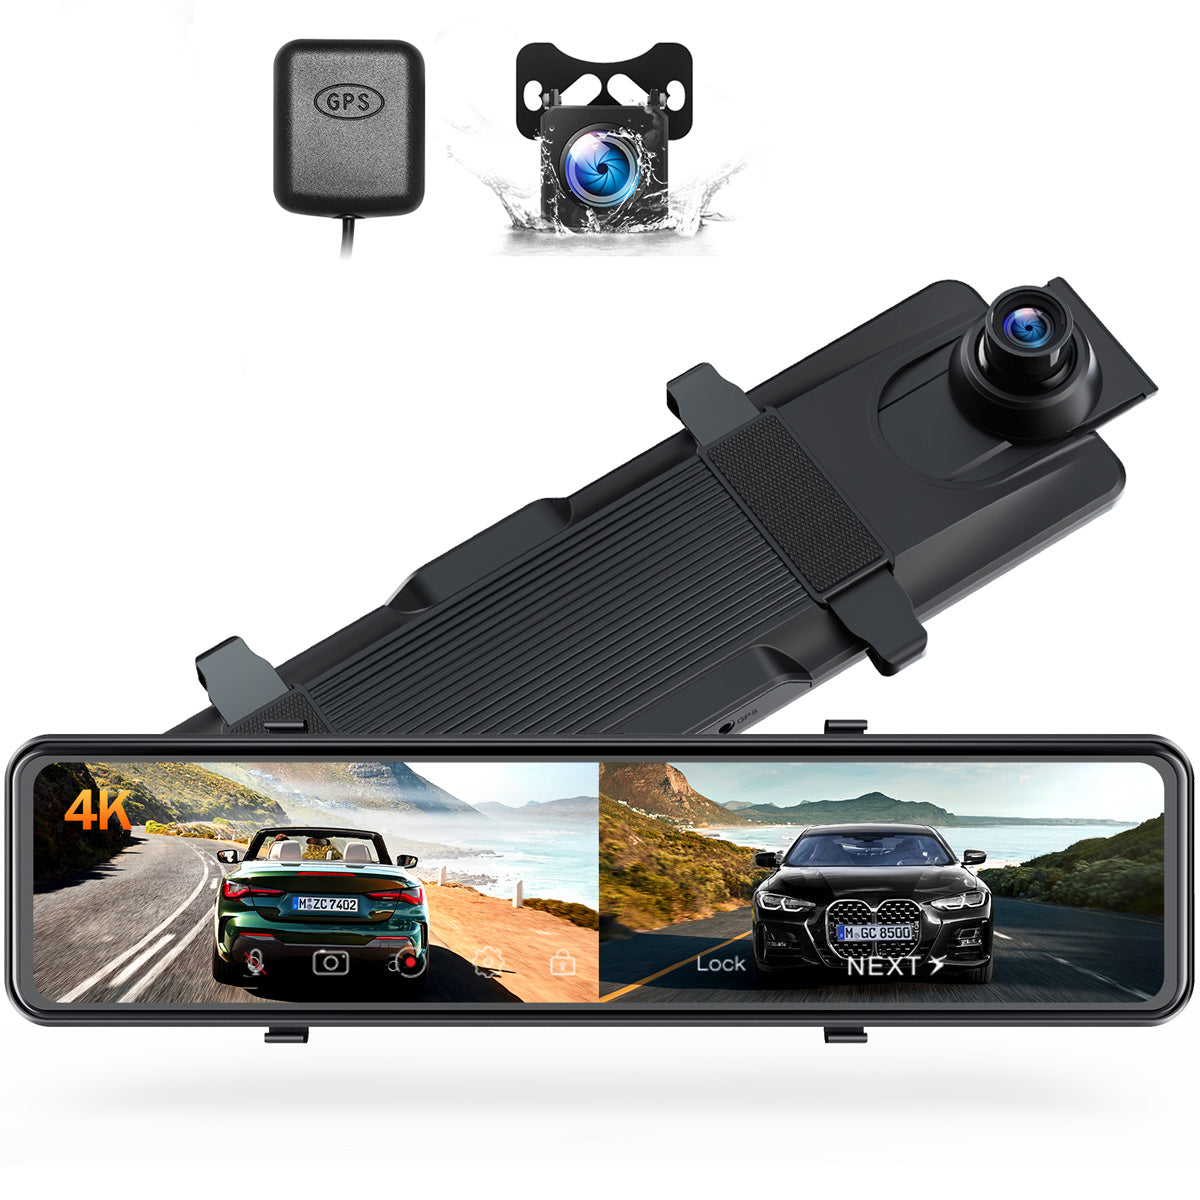 Campark CE80B 4K 12" Full Touch Screen Voice Control Mirror Dash Camera (Only available in Canada and EU)